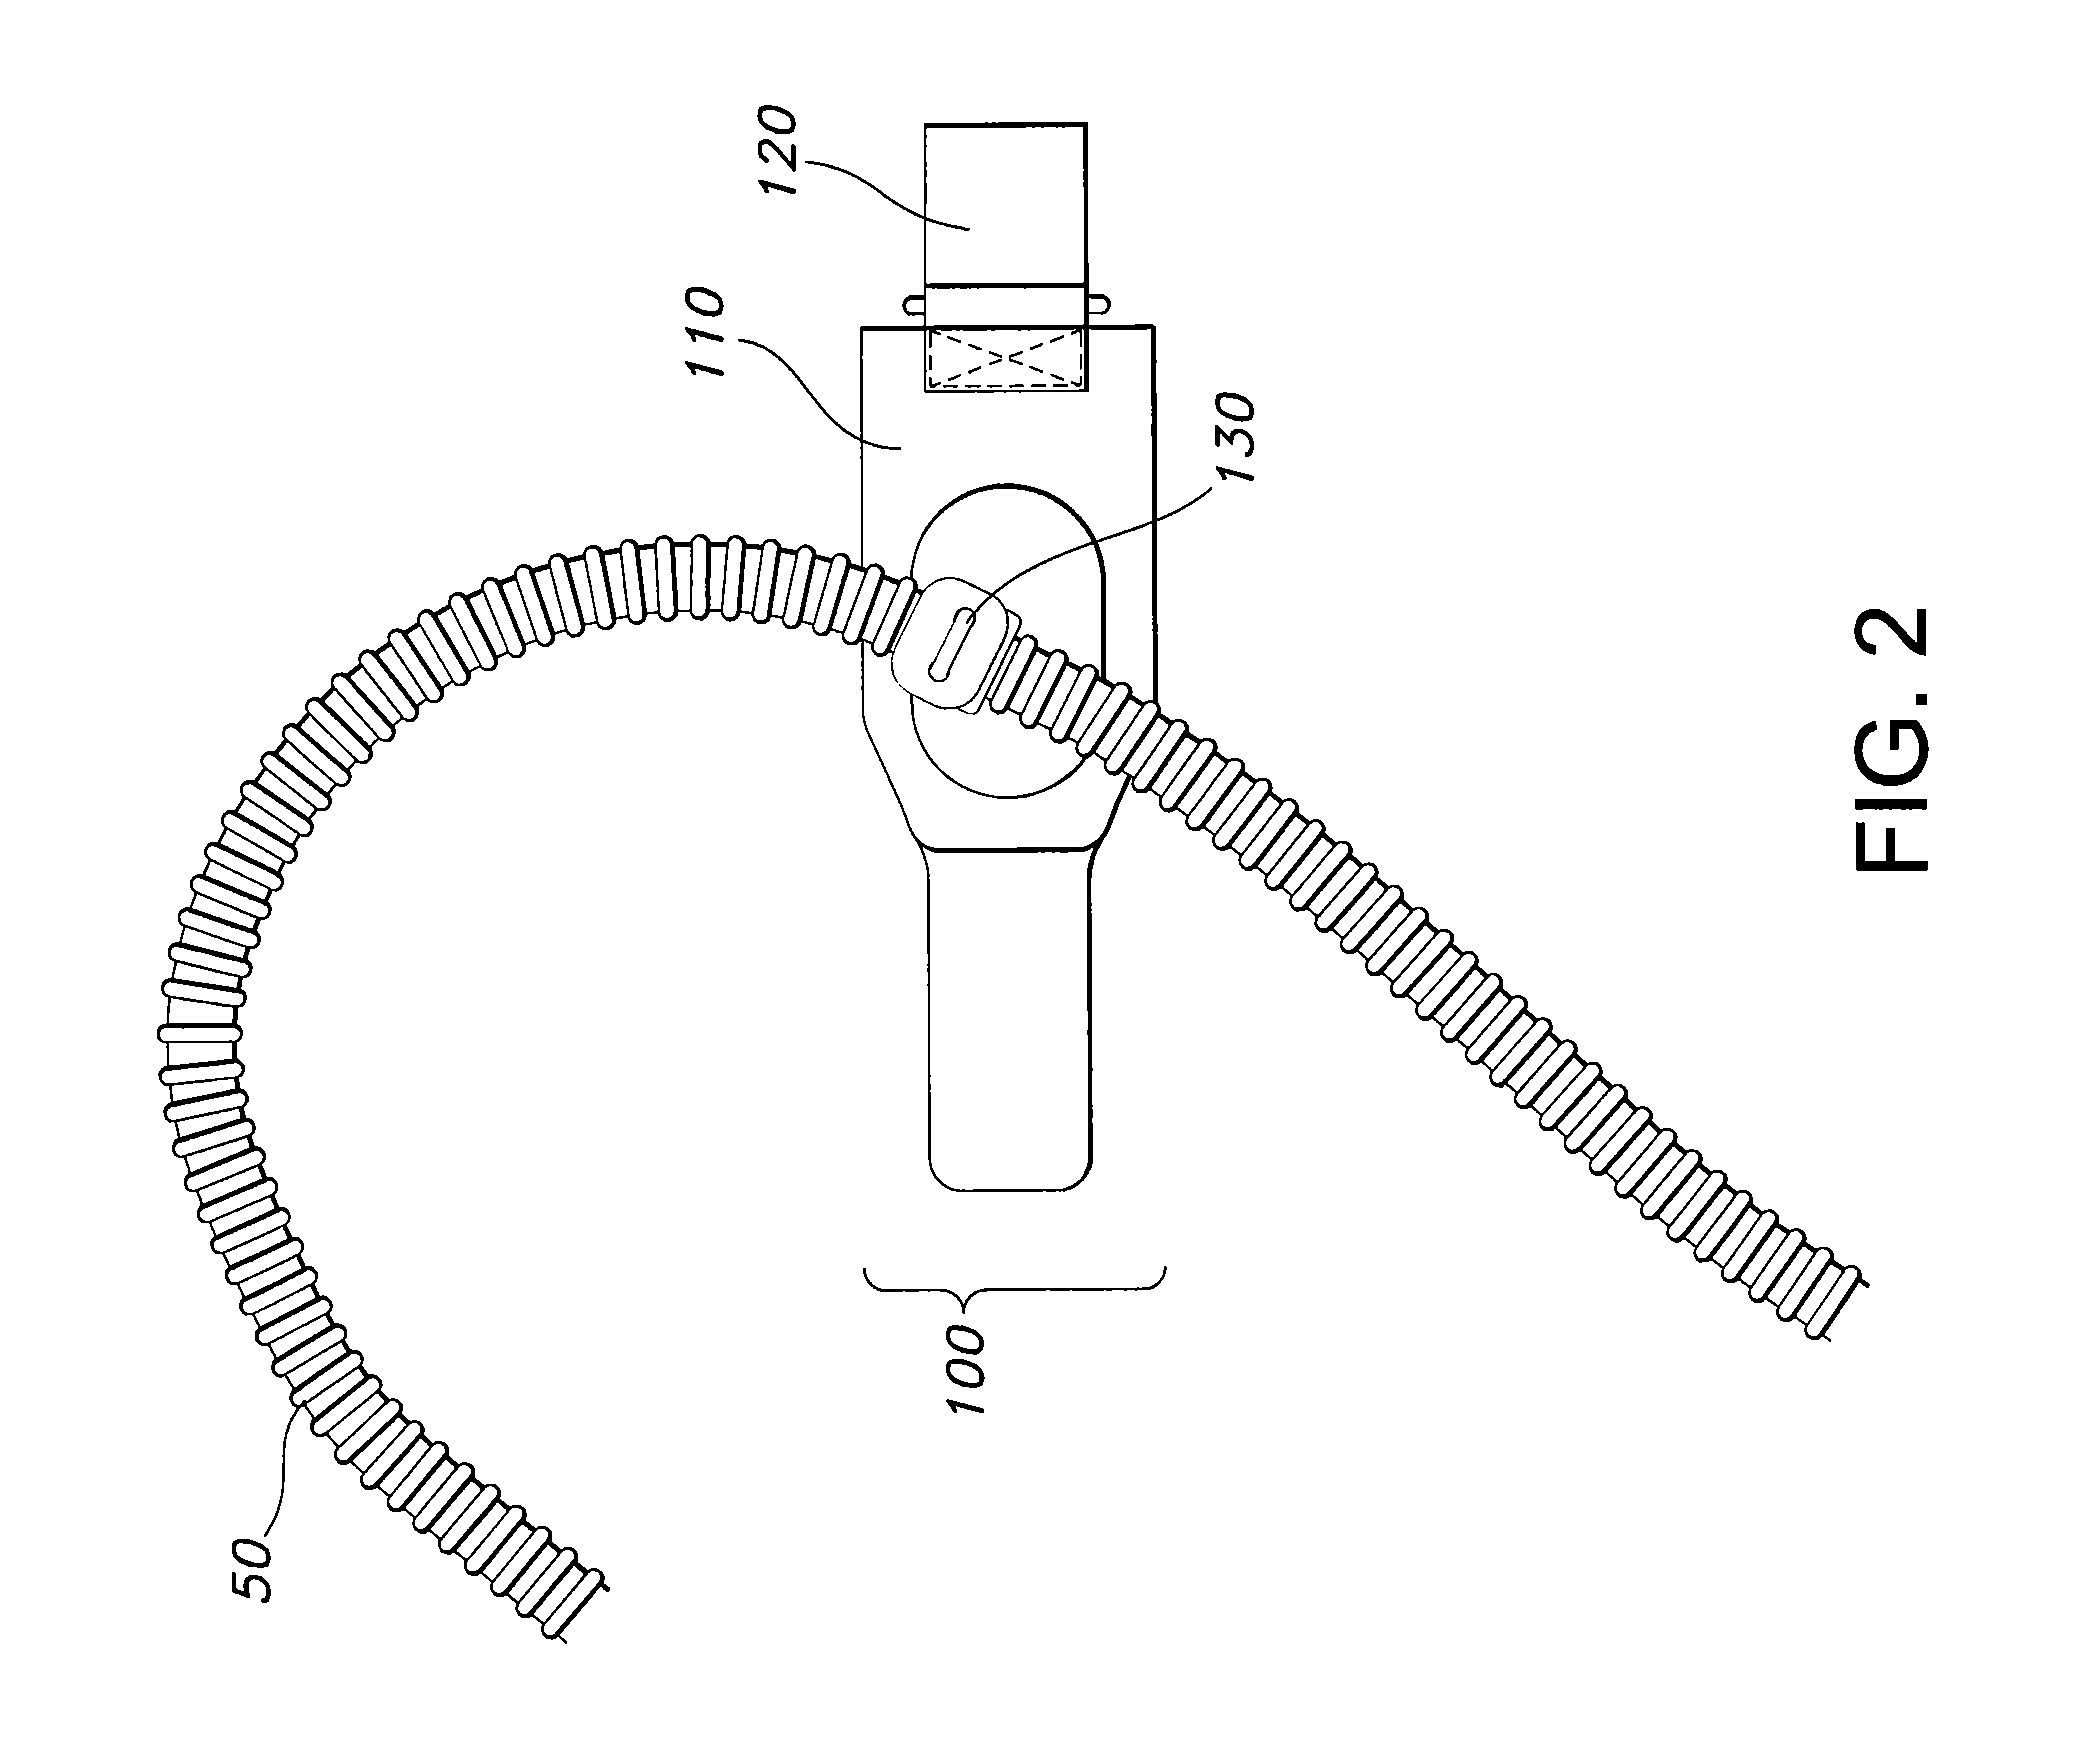 Apparatus, systems, and methods for securing a breathing tube to an arm